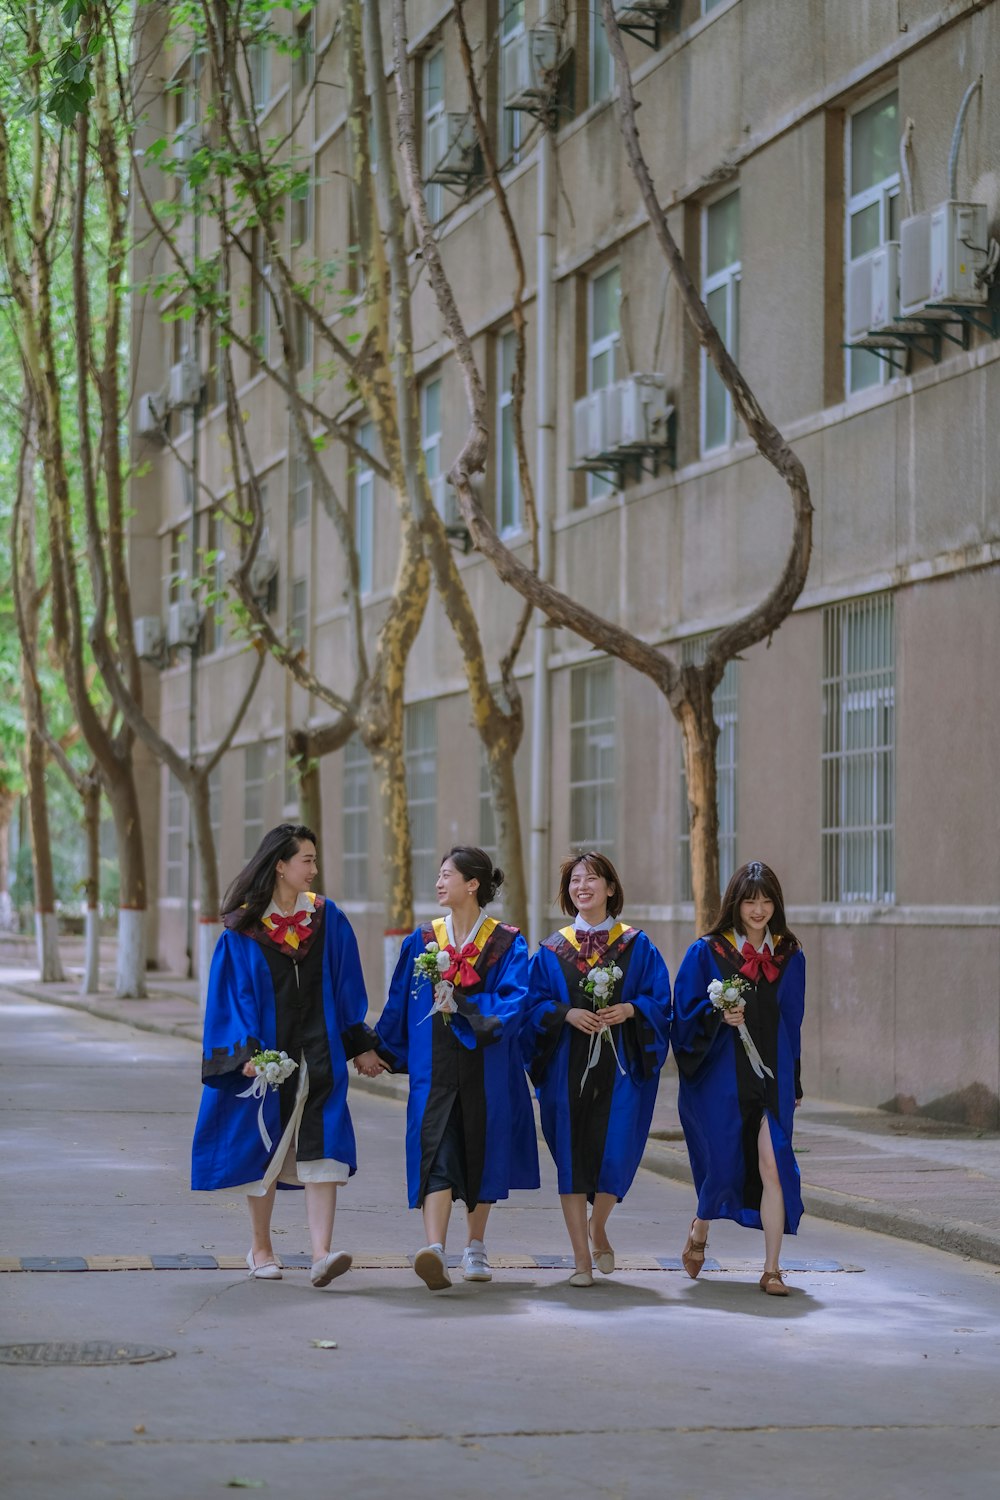 a group of women in blue gowns walking down a street